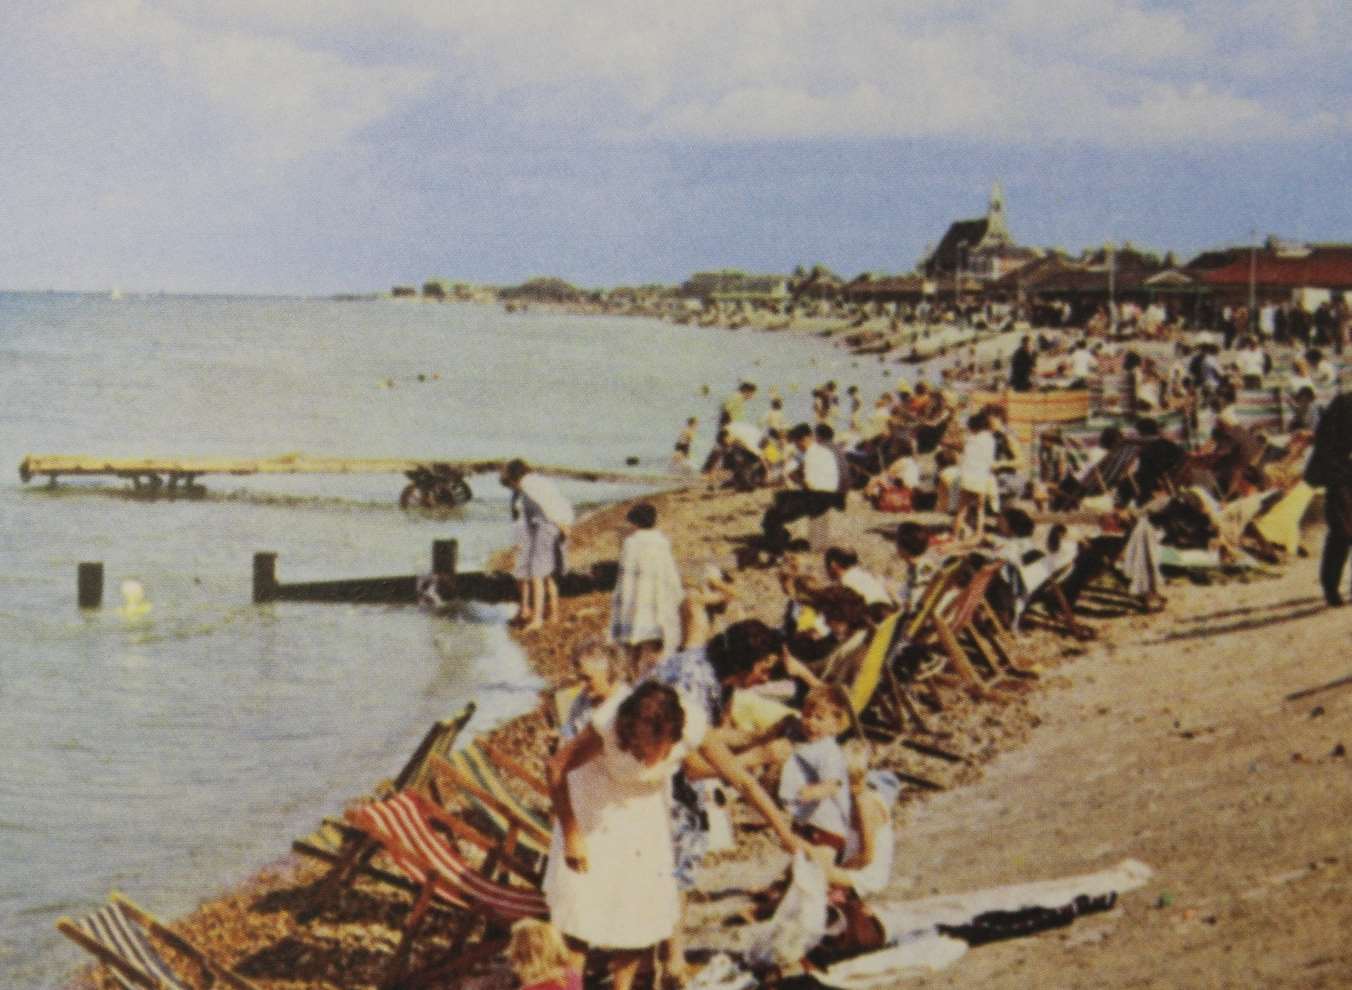 Sheerness: the golden days when the beach was packed